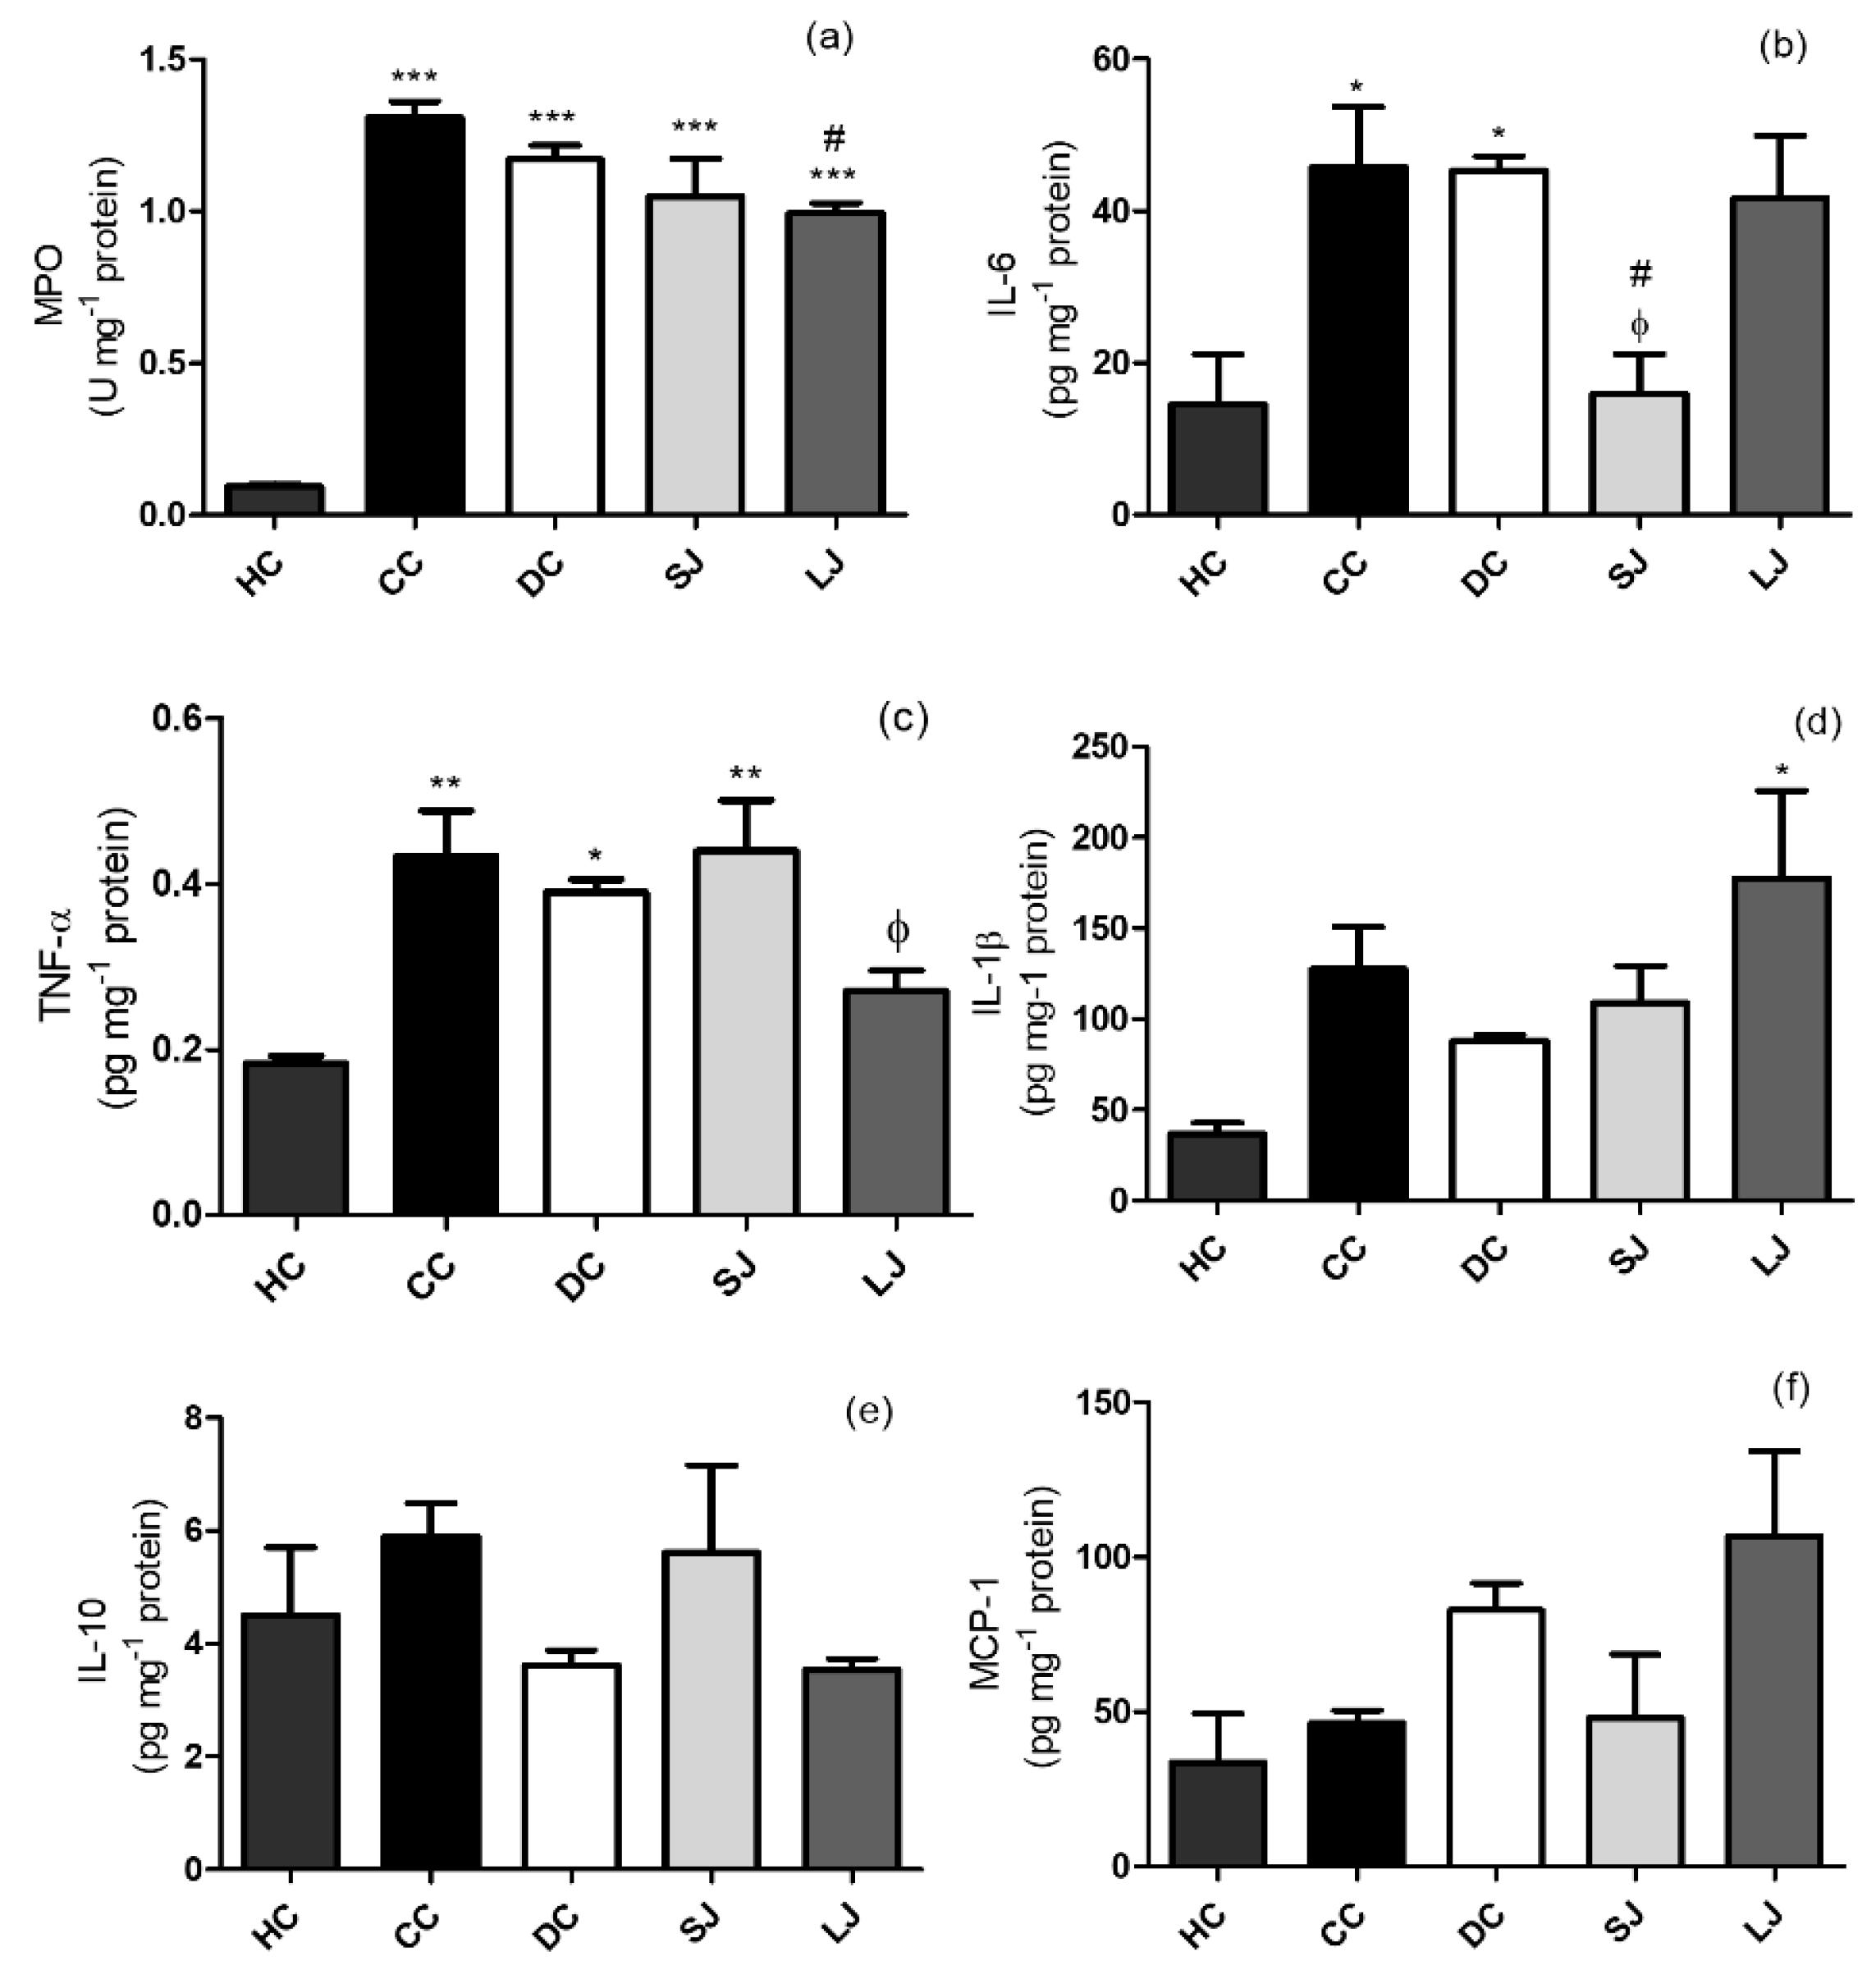 Nutrients Free Full Text Aqueous Extract Of Brazilian Berry Myrciaria Jaboticaba Peel Improves Inflammatory Parameters And Modulates Lactobacillus And Bifidobacterium In Rats With Induced Colitis Html